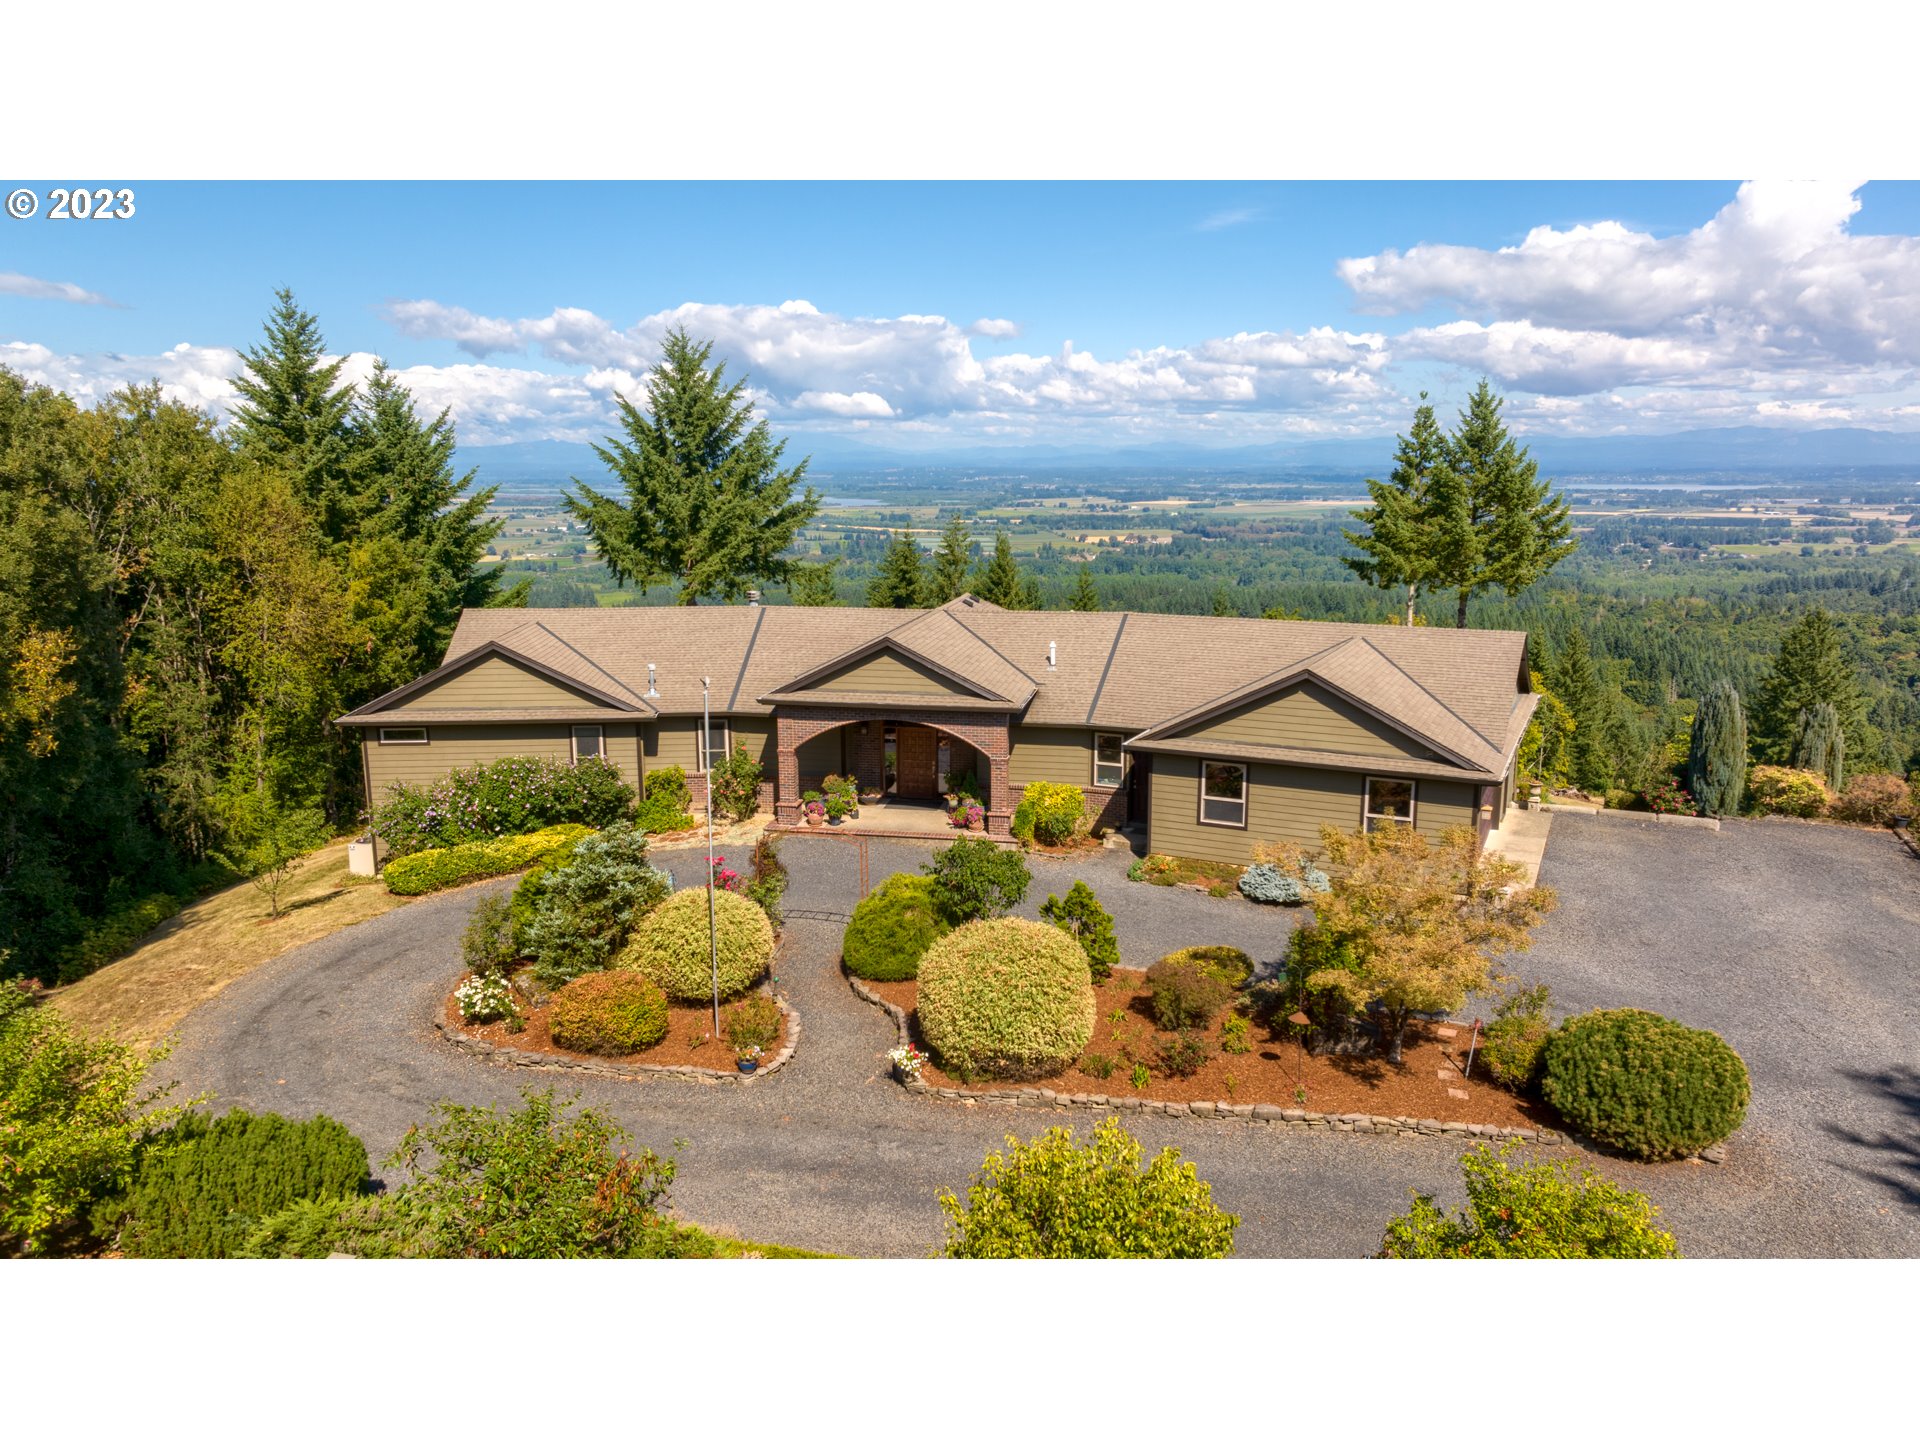 As you drive down the 1500 ft driveway, your stress level will begin to fade as you see hints of the stunning views yet to come. Once inside the custom-built contemporary home on 18.79 beautiful acres, you'll experience privacy and peace from the views of five mountains, lakes, ships on the Columbia and Willamette Rivers, sailboats on the Multnomah Channel and the patchwork of farms, including pumpkin fields, on Sauvie Island. The main-floor living provides a circular window seat for wildlife viewing, a chef's kitchen with two ovens and two sinks. A slider from the kitchen / dining area opens to the deck where hummingbirds hover. Primary bedroom suite, laundry and office are conveniently on the first level along with a full mudroom with doggie shower. The lower level, with the same spectacular views, offers multiple bedrooms, a full bath, and a living area with fireplace. That area is pre-plumbed for a kitchenette or wet bar. There's also lots of storage space and an exterior entrance. Outside is a 700sqft detached shop, storage building for lawn mowers, tractors, garden supplies. Fruit trees abound and there is ample room for vegetable or flower gardens. The fir forest attracts many birds, elk, deer and other wildlife. Easy commute to Intel, Nike, Hillsboro, Beaverton, shopping and libraries. It's the perfect, permanent, peaceful getaway for you and your family. Warning: visitors never want to leave!